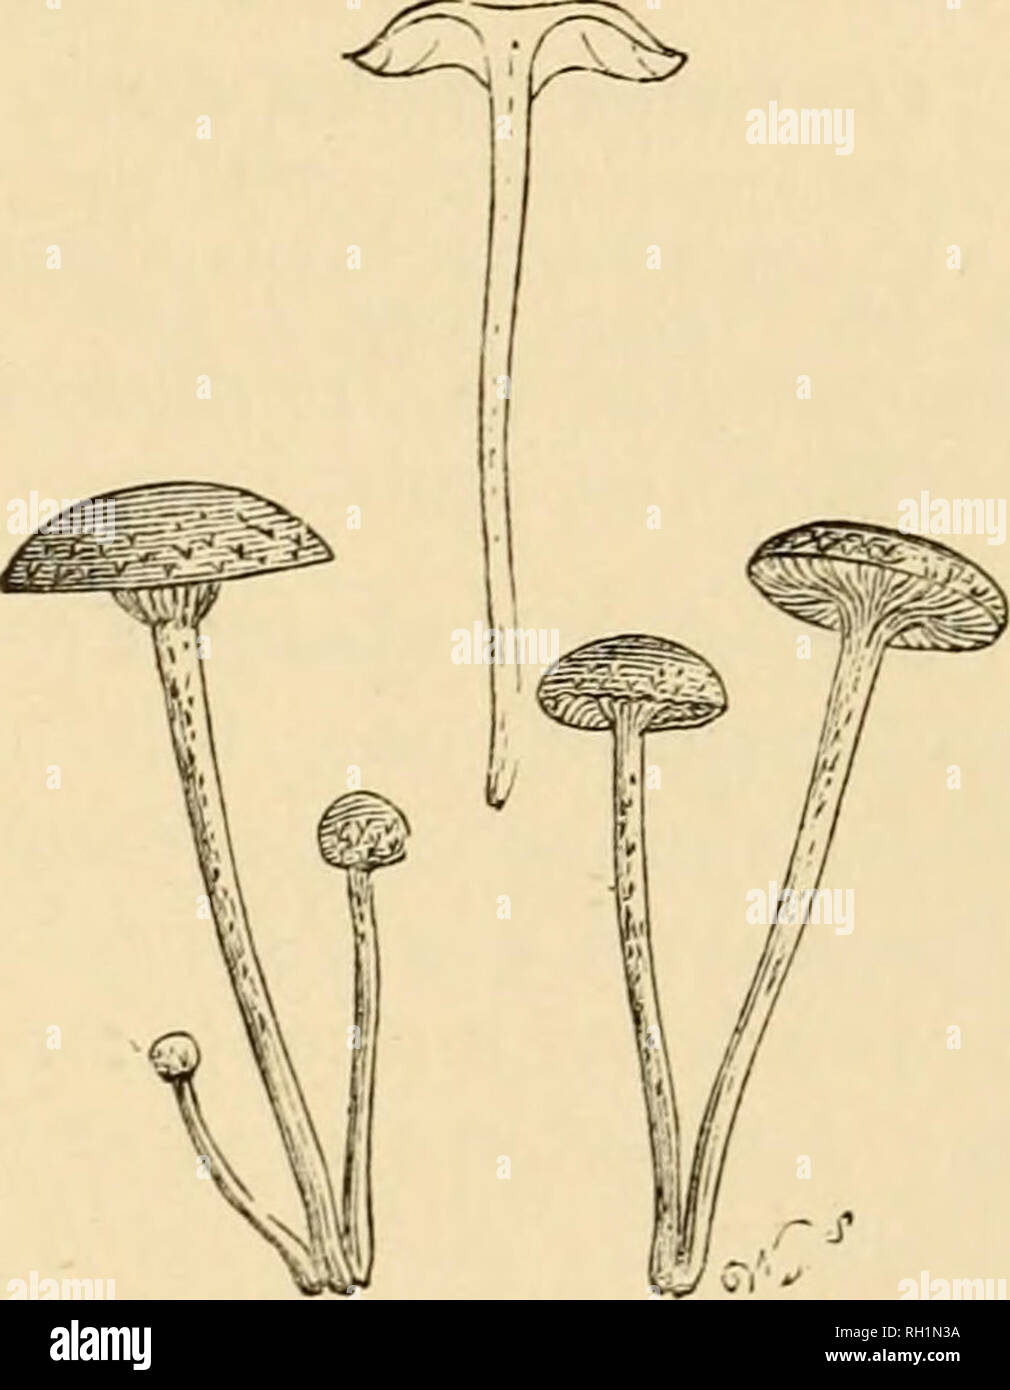 . British fungi (Hymenomycetes). Fungi -- Great Britain. DERMINI. 297 This species has occurred with pallid gills entirely devoid of spores. B. df Br. Galera. Name — oi//is, resemblance. Mycena-VG.. Fr. Monogr. i. f. 395. Hym. Eur. p. 271. Icon. t. i2g. f. i. B. ^ Br. n. 1124. C. Hbk. n. 384. Illust. PL 467. b. Hoffm. Ic. t. 6. a. , Subgenus XXVI. TUBARIA {tuba, a trumpet).—Worth. Smith Tubaria. in Seem. Journ. 1870. Stem somewhat cartilaginous, Jistulose. Pileus somewhat membranaceous, often clothed with the universal floc- cose veil. Gills somewhat decurrent. Spores ferruginous or (in Phas Stock Photo